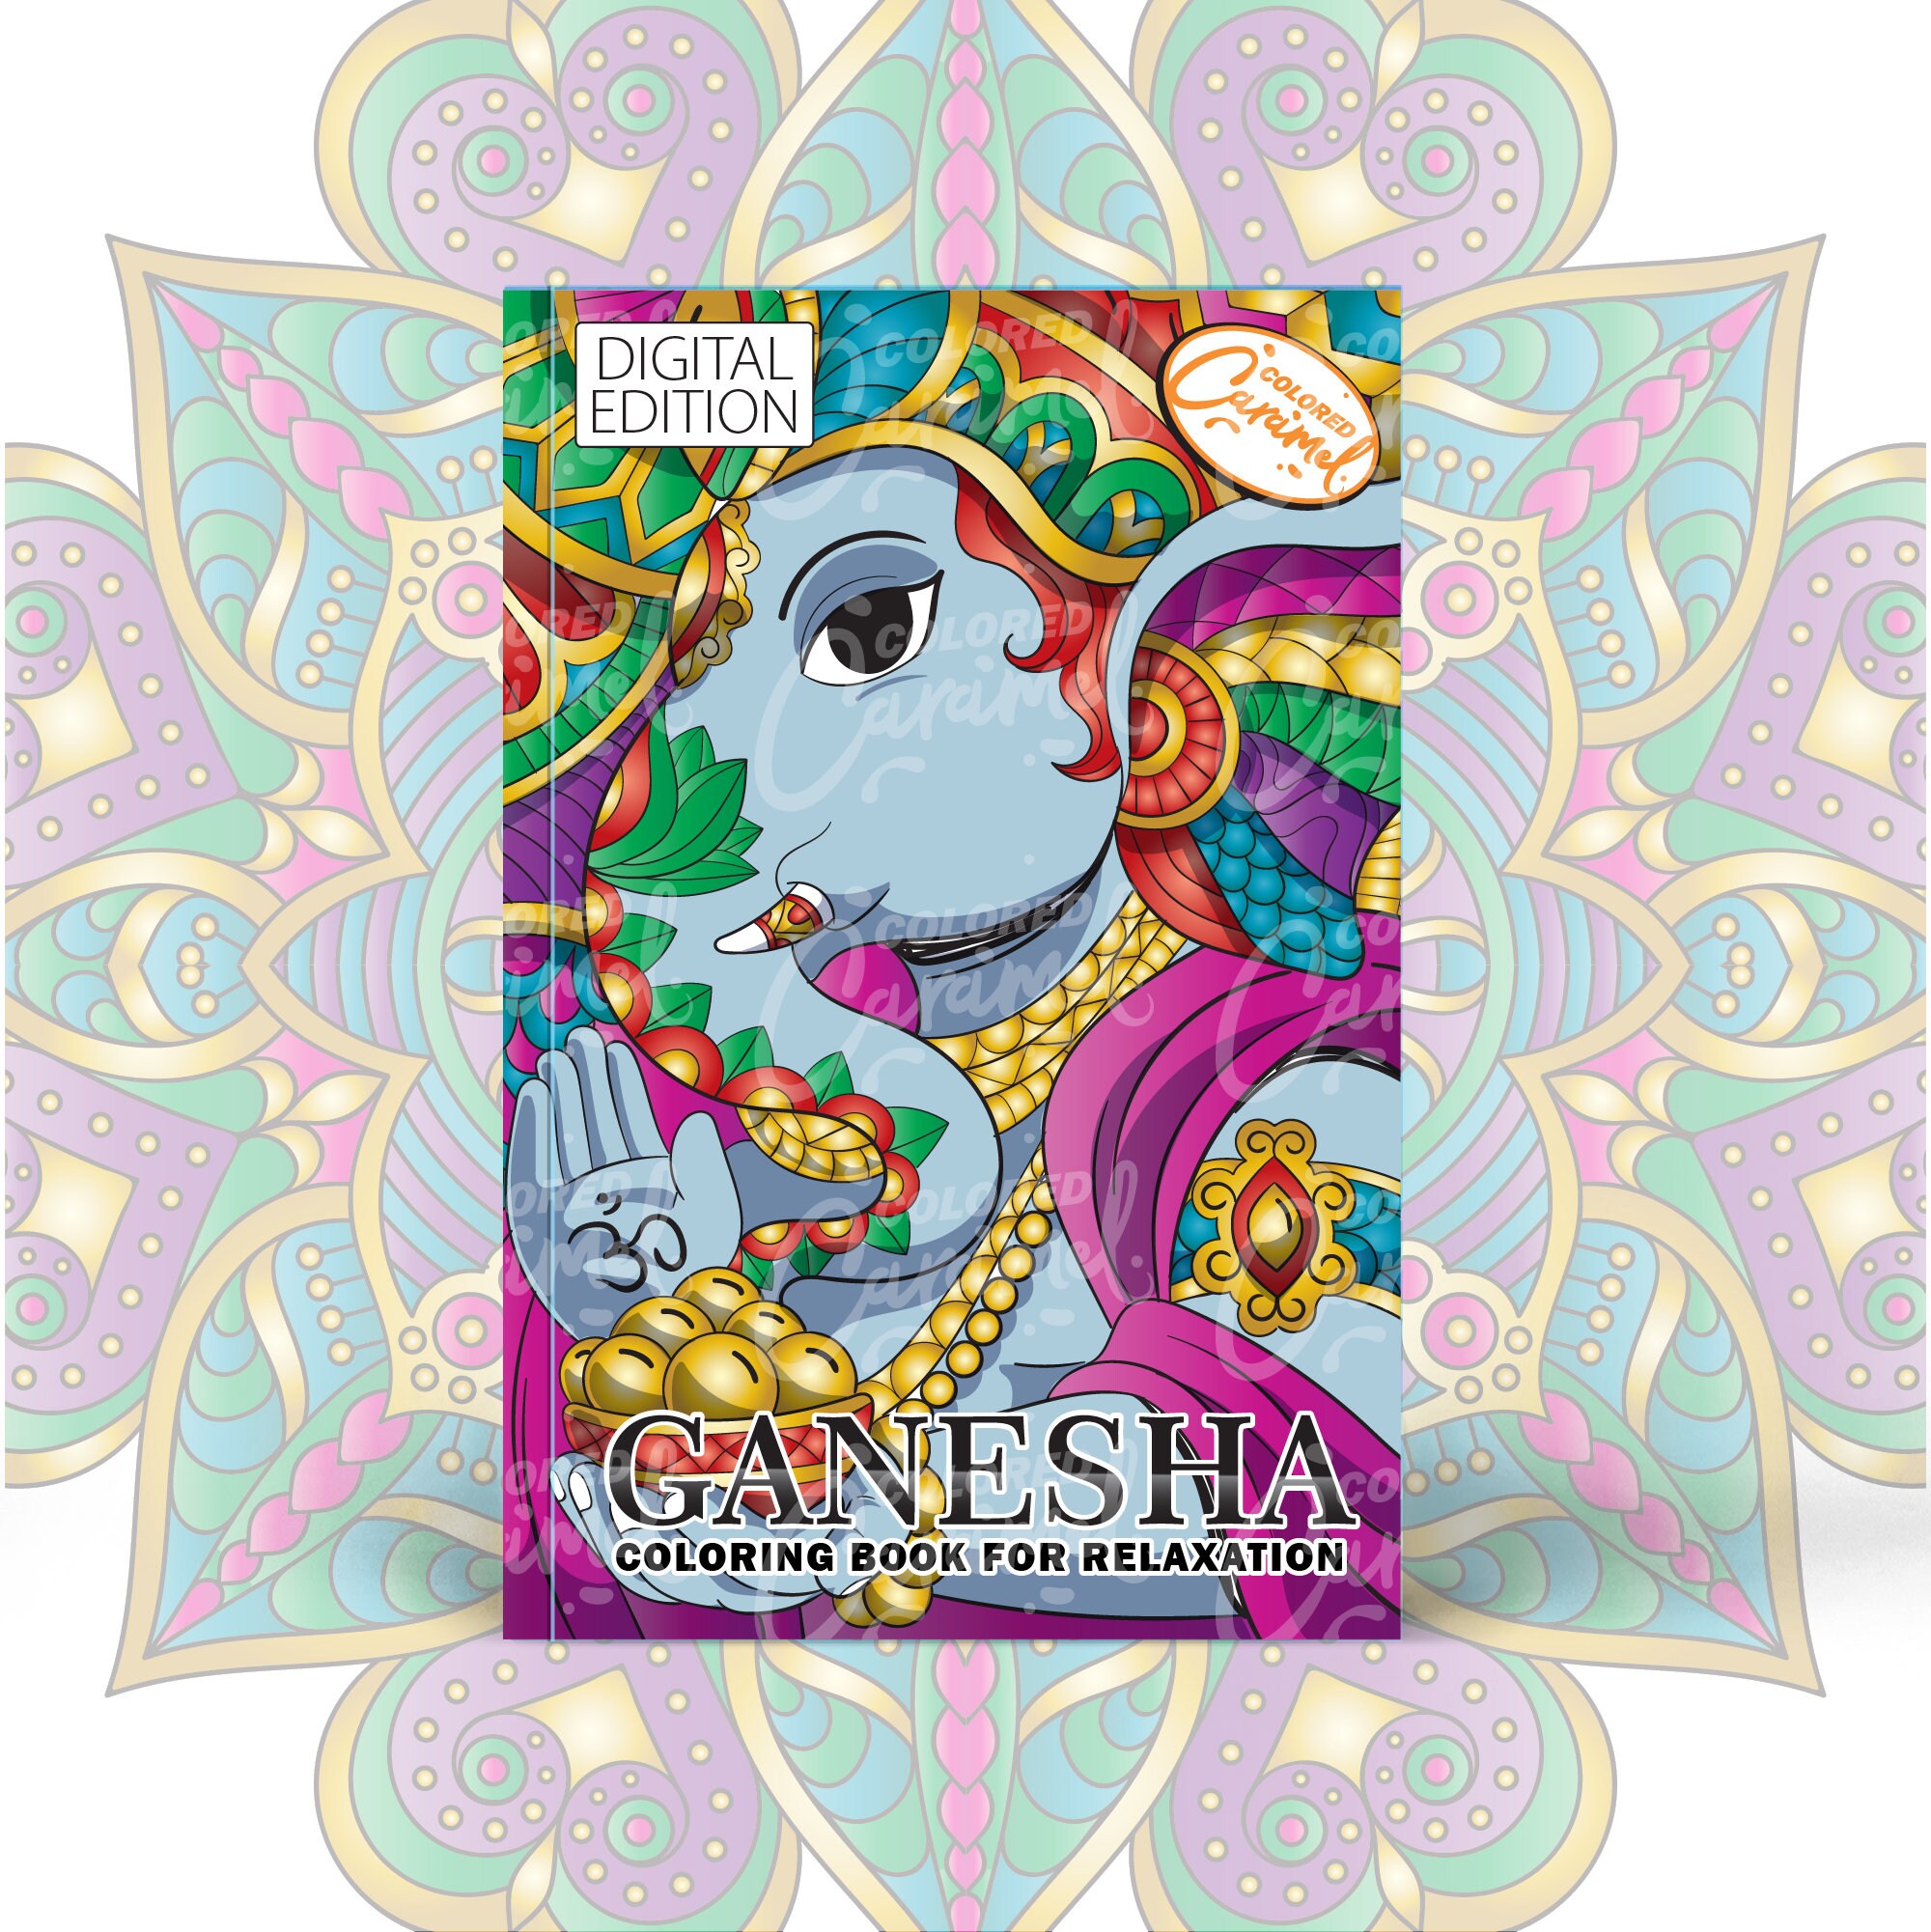 Ganesha Elephant Mandalas Coloring Book, Printable Digital PDF Instant Download, Relaxing Colorable Pages of Beautiful Patterns and Flowers